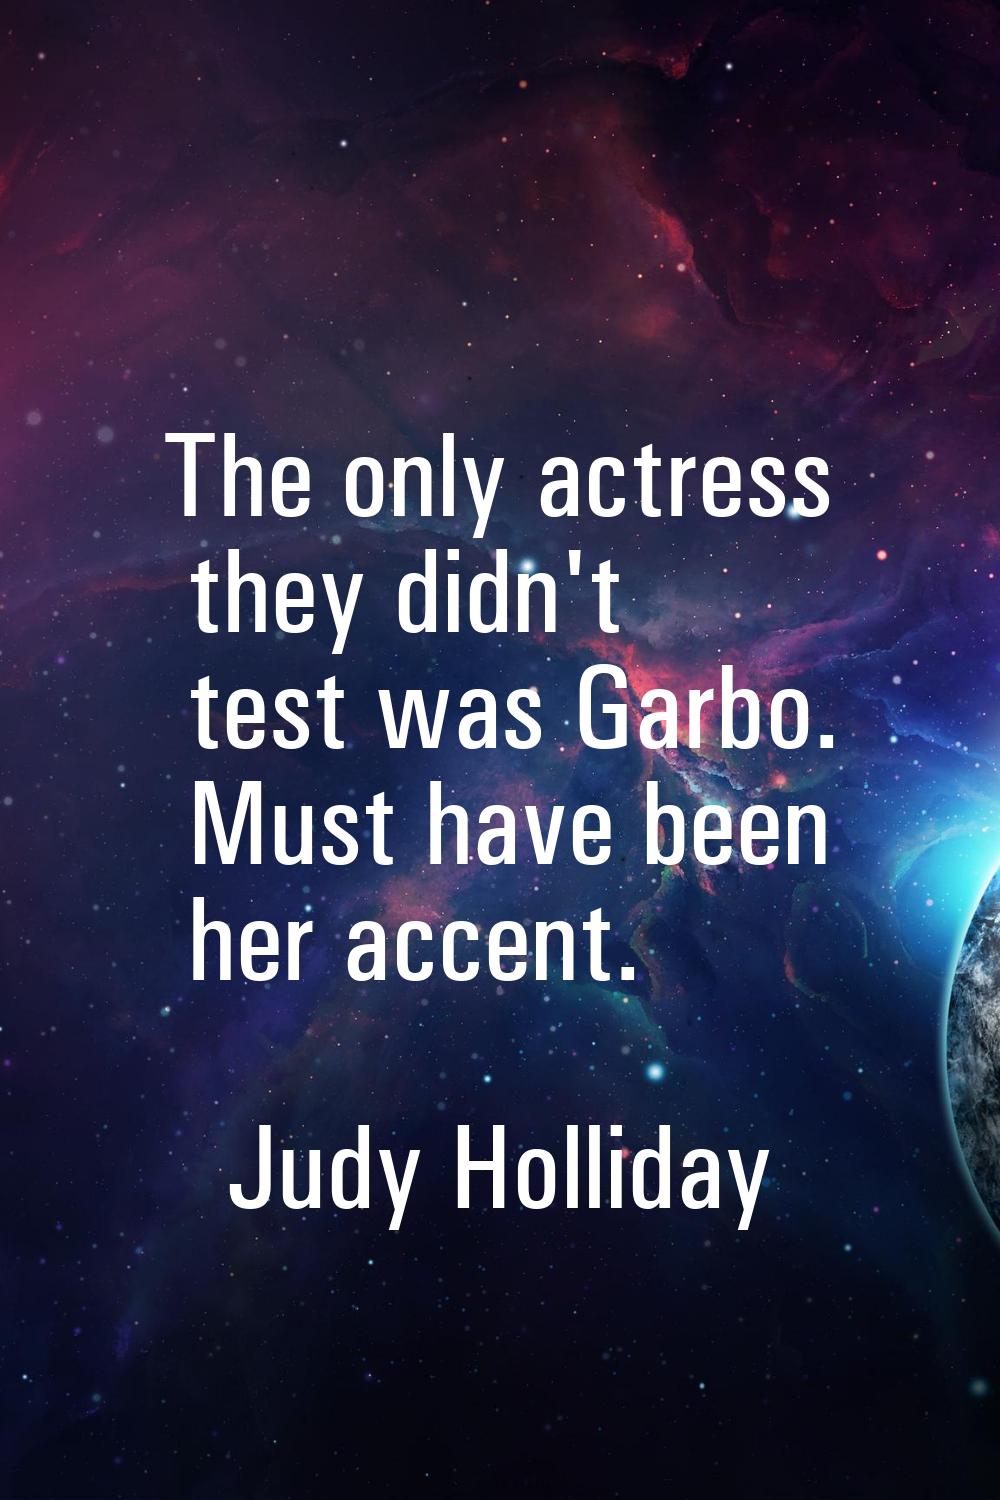 The only actress they didn't test was Garbo. Must have been her accent.